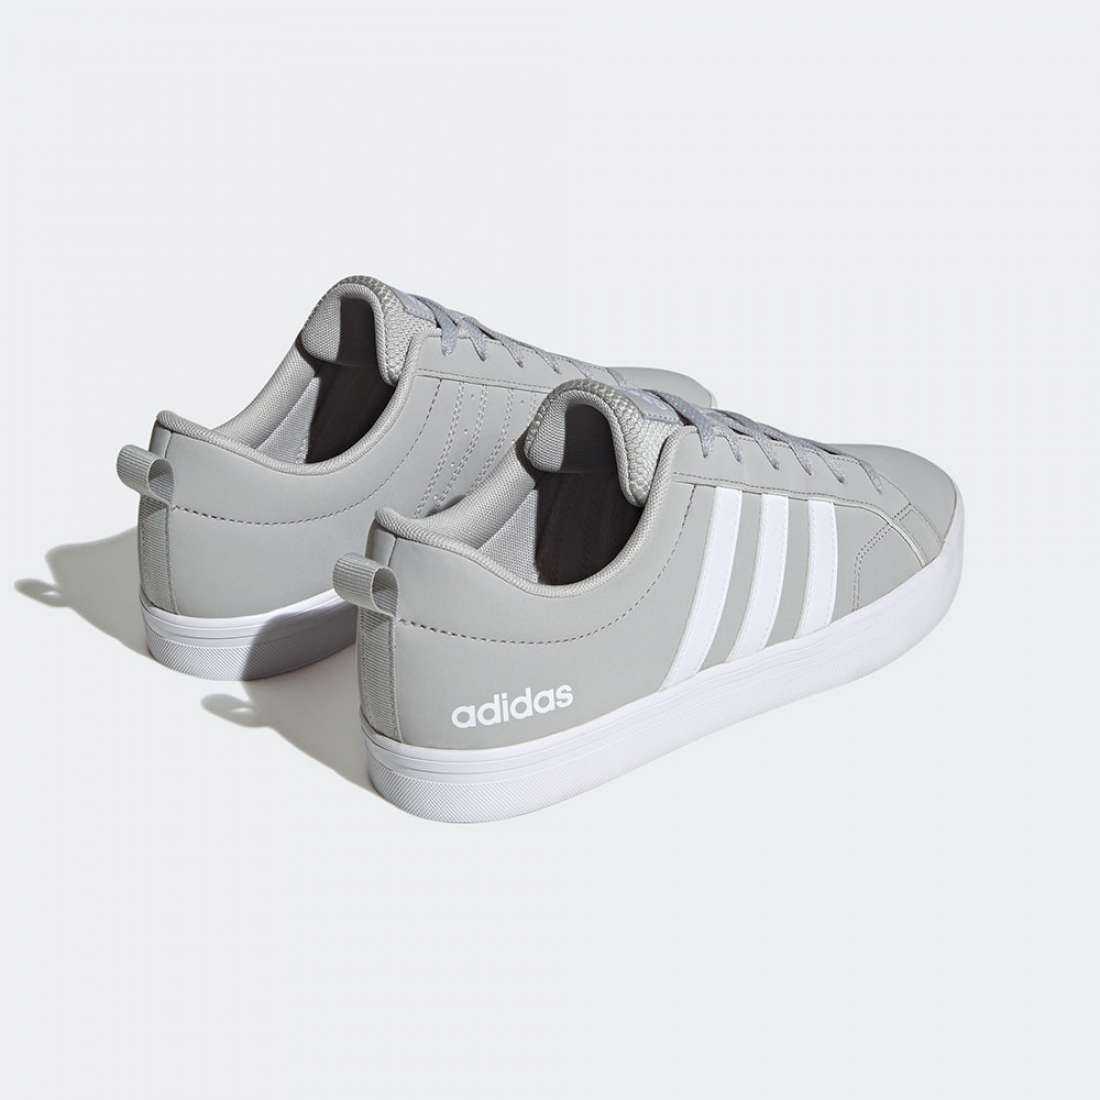 ADIDAS VS PACE 2.0 GRETWO/FTWWHT/FTWWHT